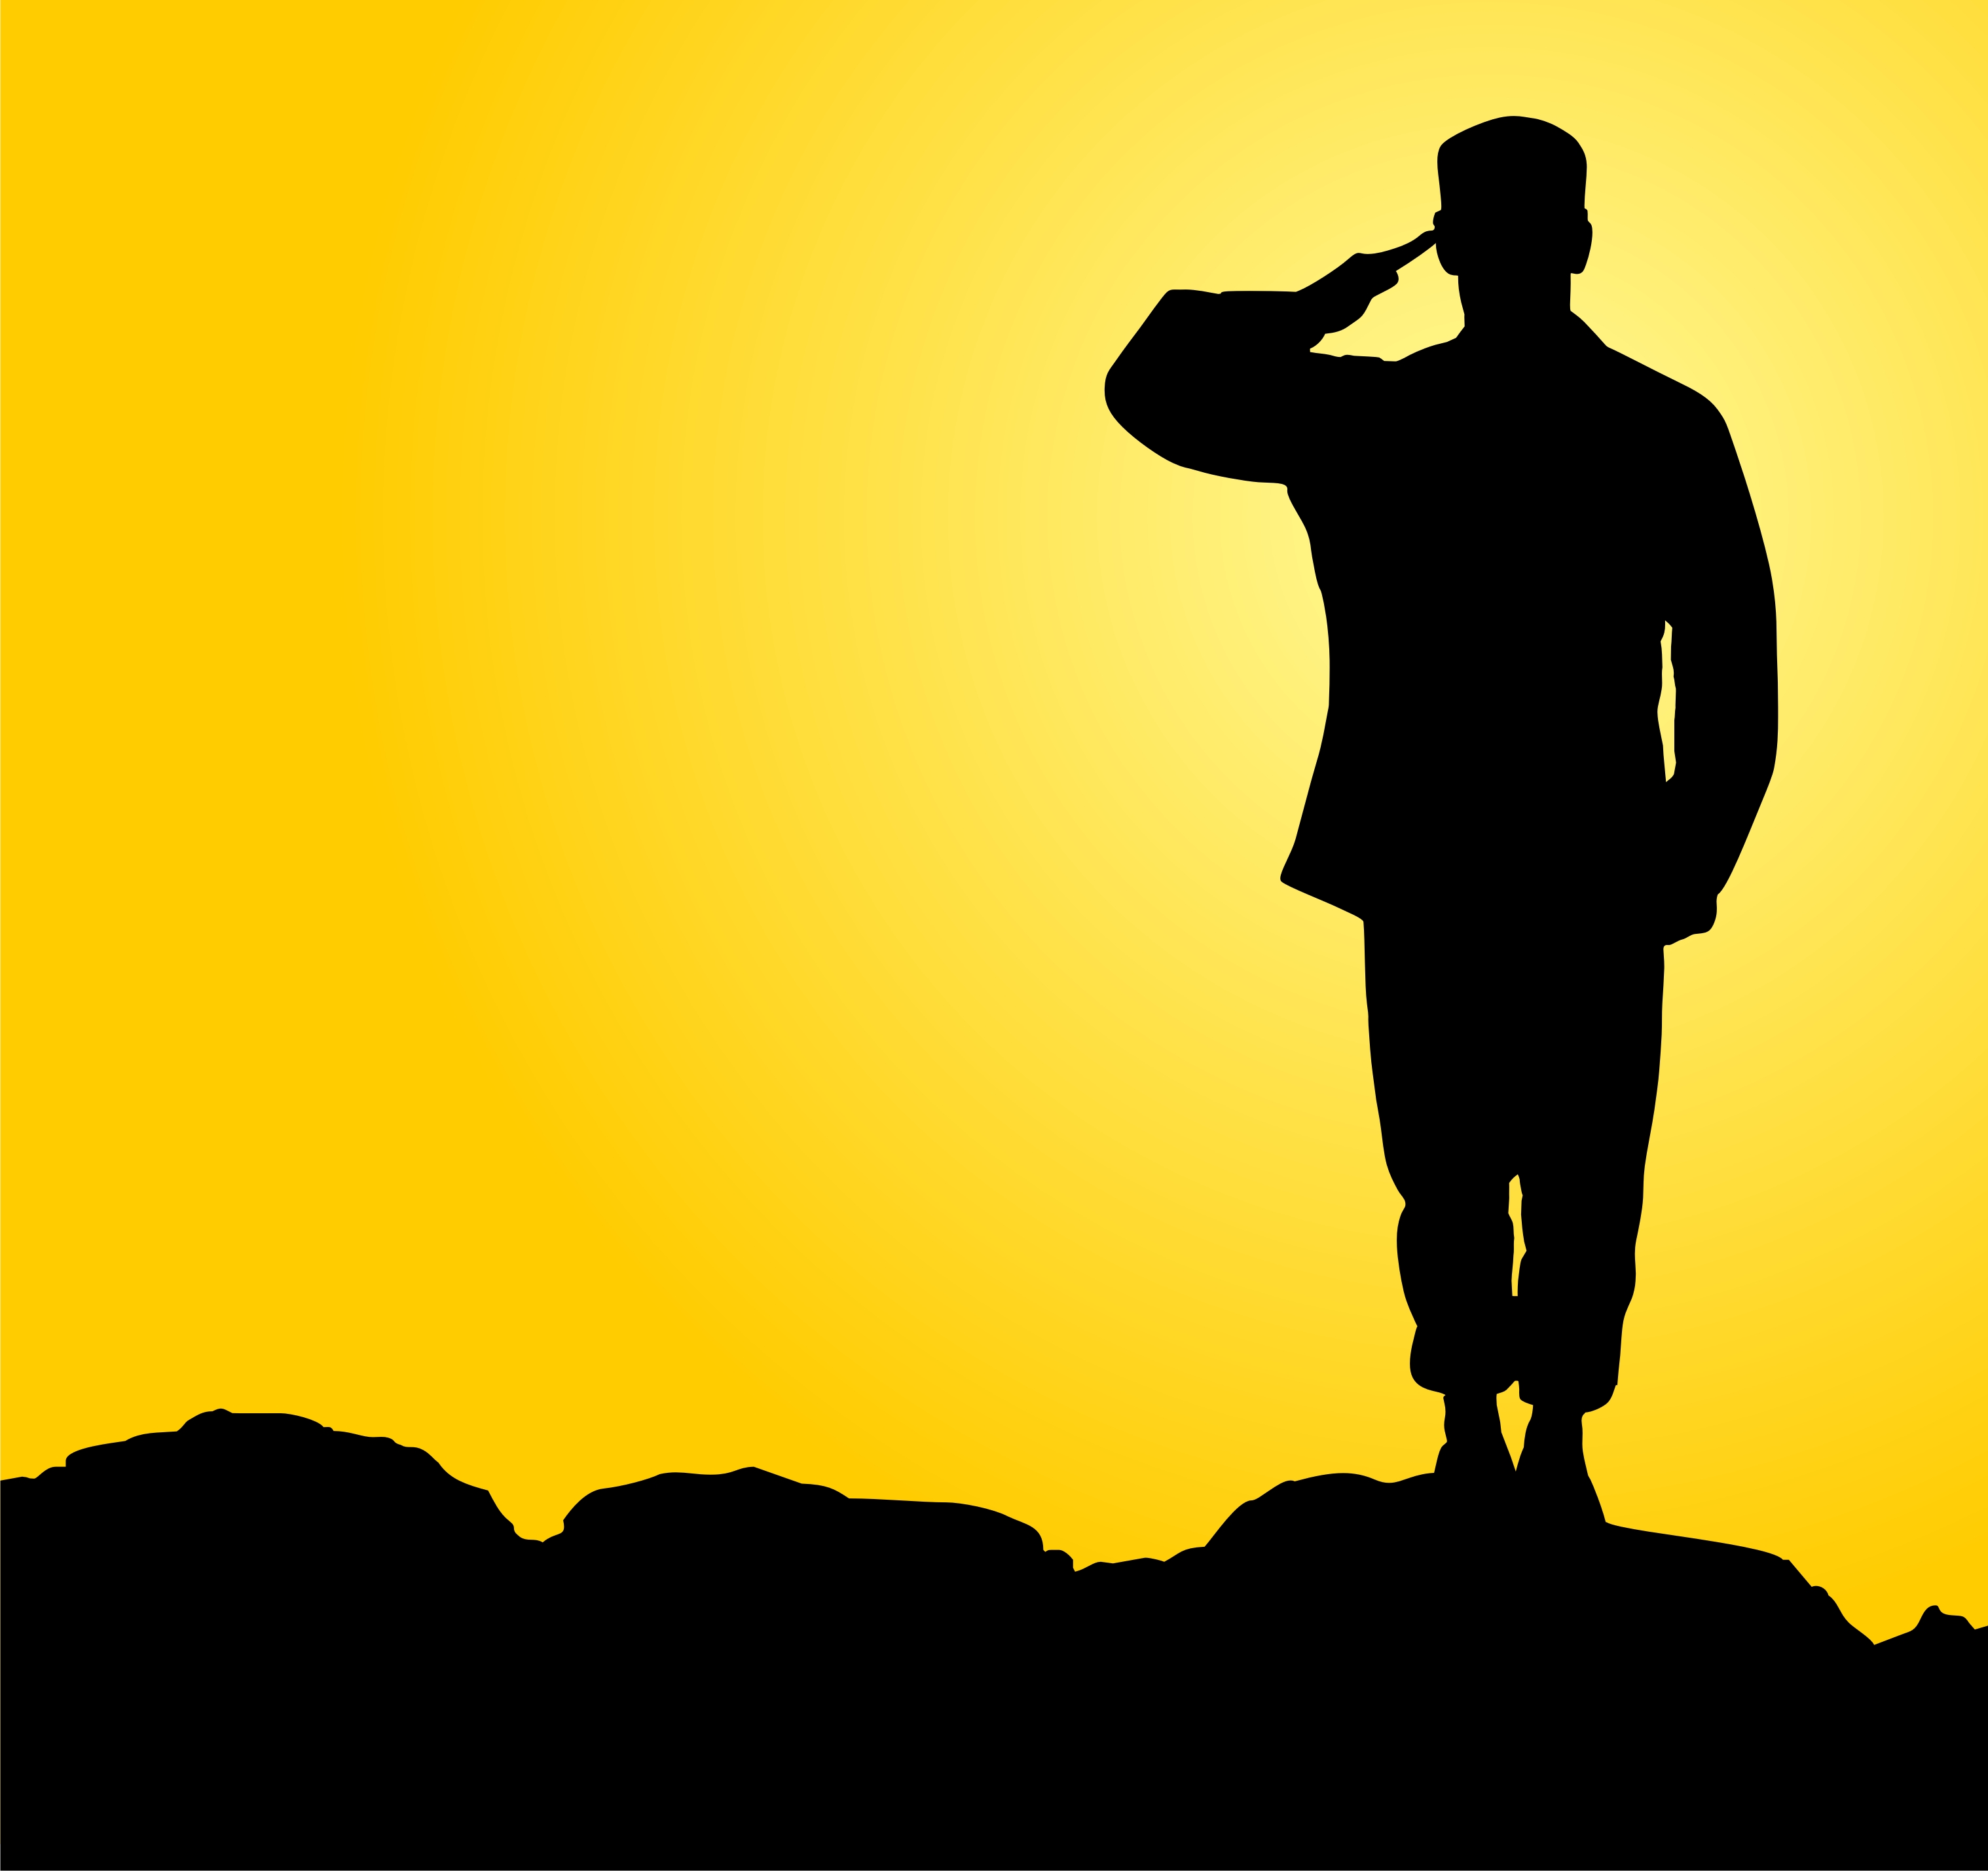 SILHOUETTE OF A SOLDIER SALUTING 